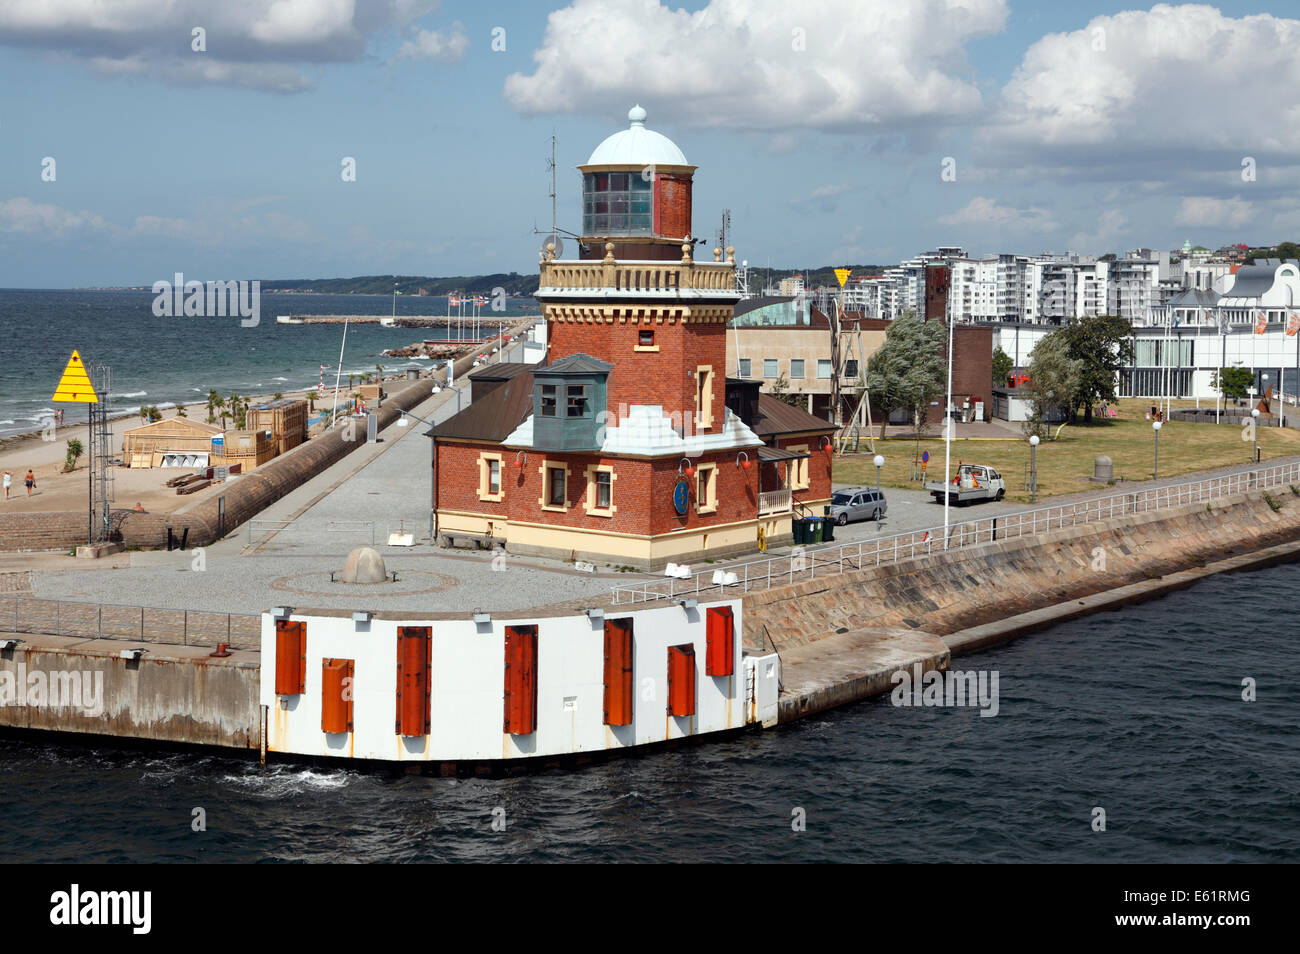 The old pilot station and port harbour lighthouse in Helsingborg Harbour. Left the Tropical Beach. Right residential blocks. Stock Photo